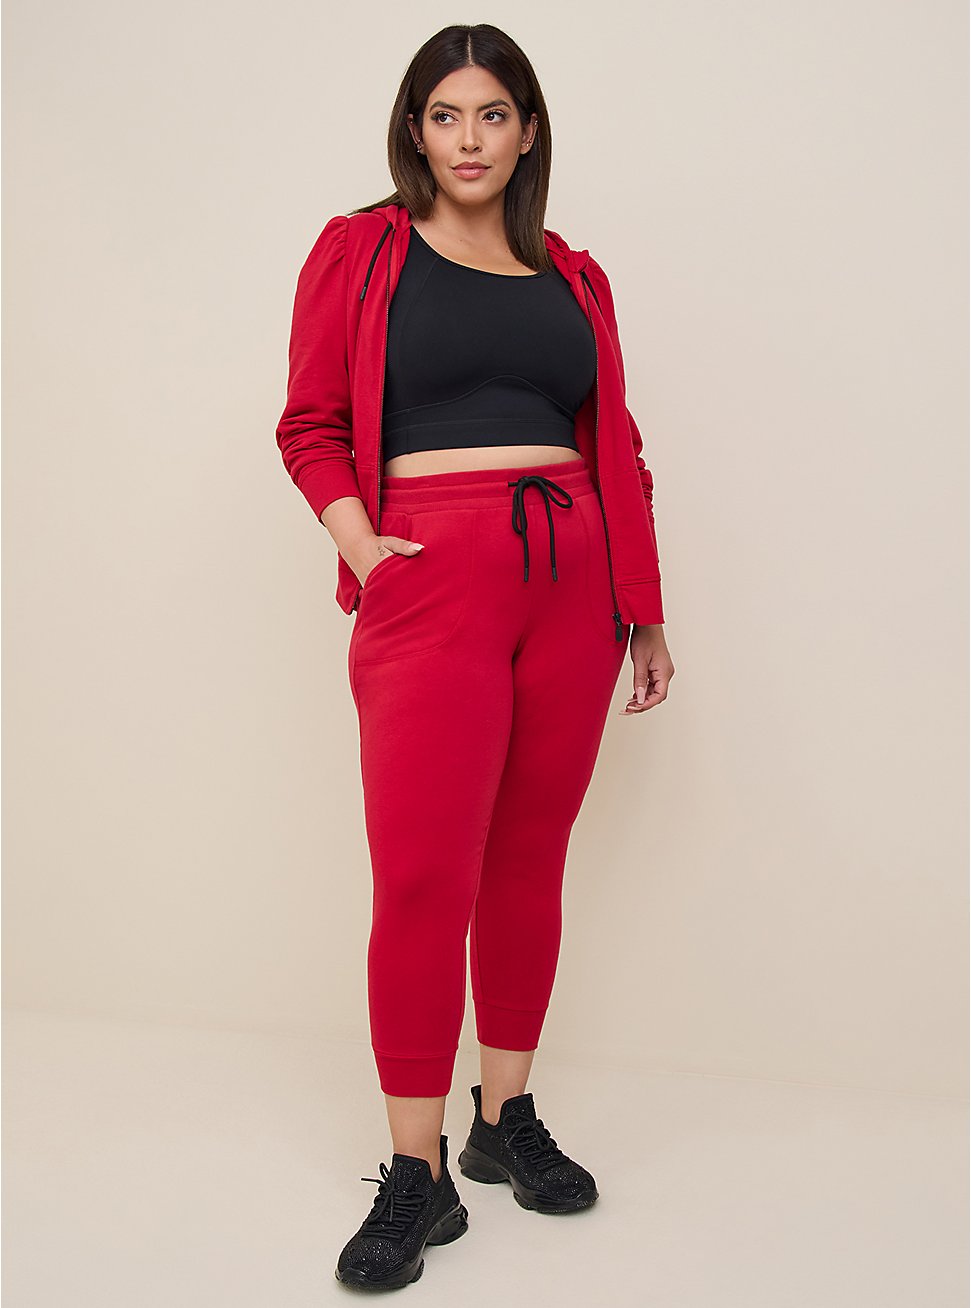 Everyday Fleece Crop Active Jogger In Classic Fit, JESTER RED, hi-res